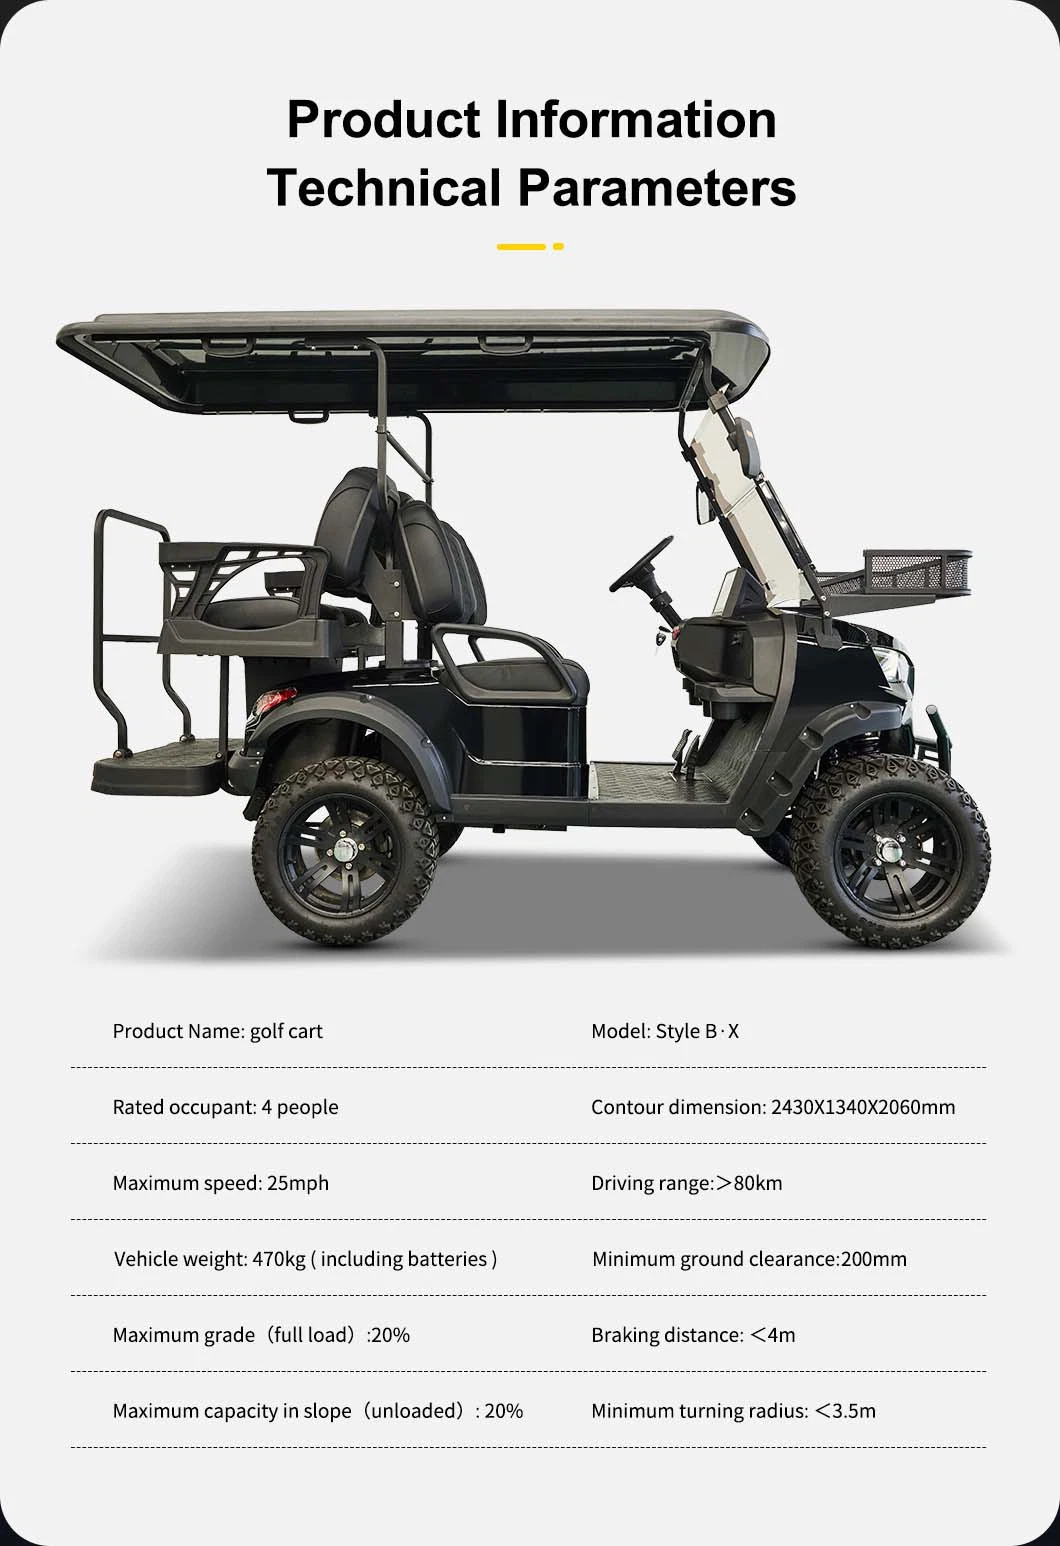 2023 New Modle Style Bx 4 Seat Sightseeing Bus Club Cart Electric Golf Buggy Hunting Golf Vehicle